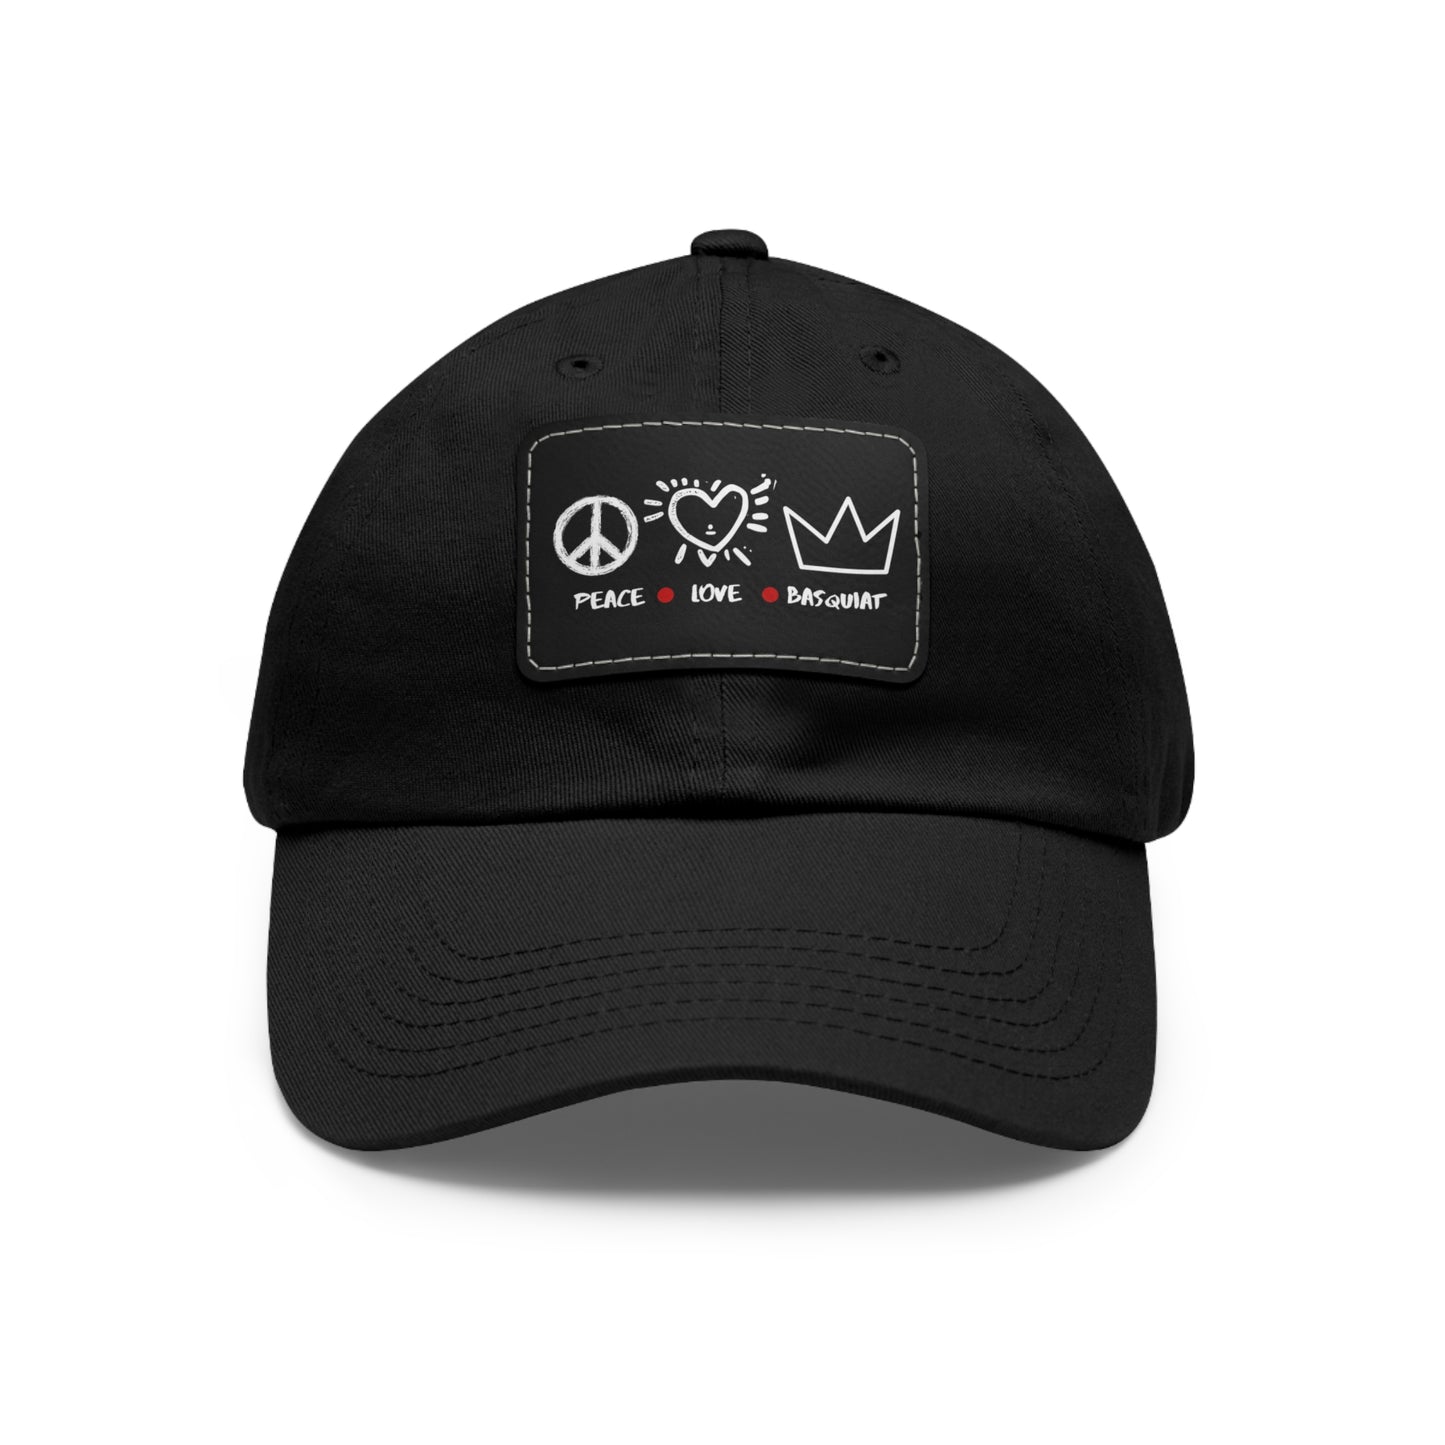 Basquiat Themed Cap with Leather Patch